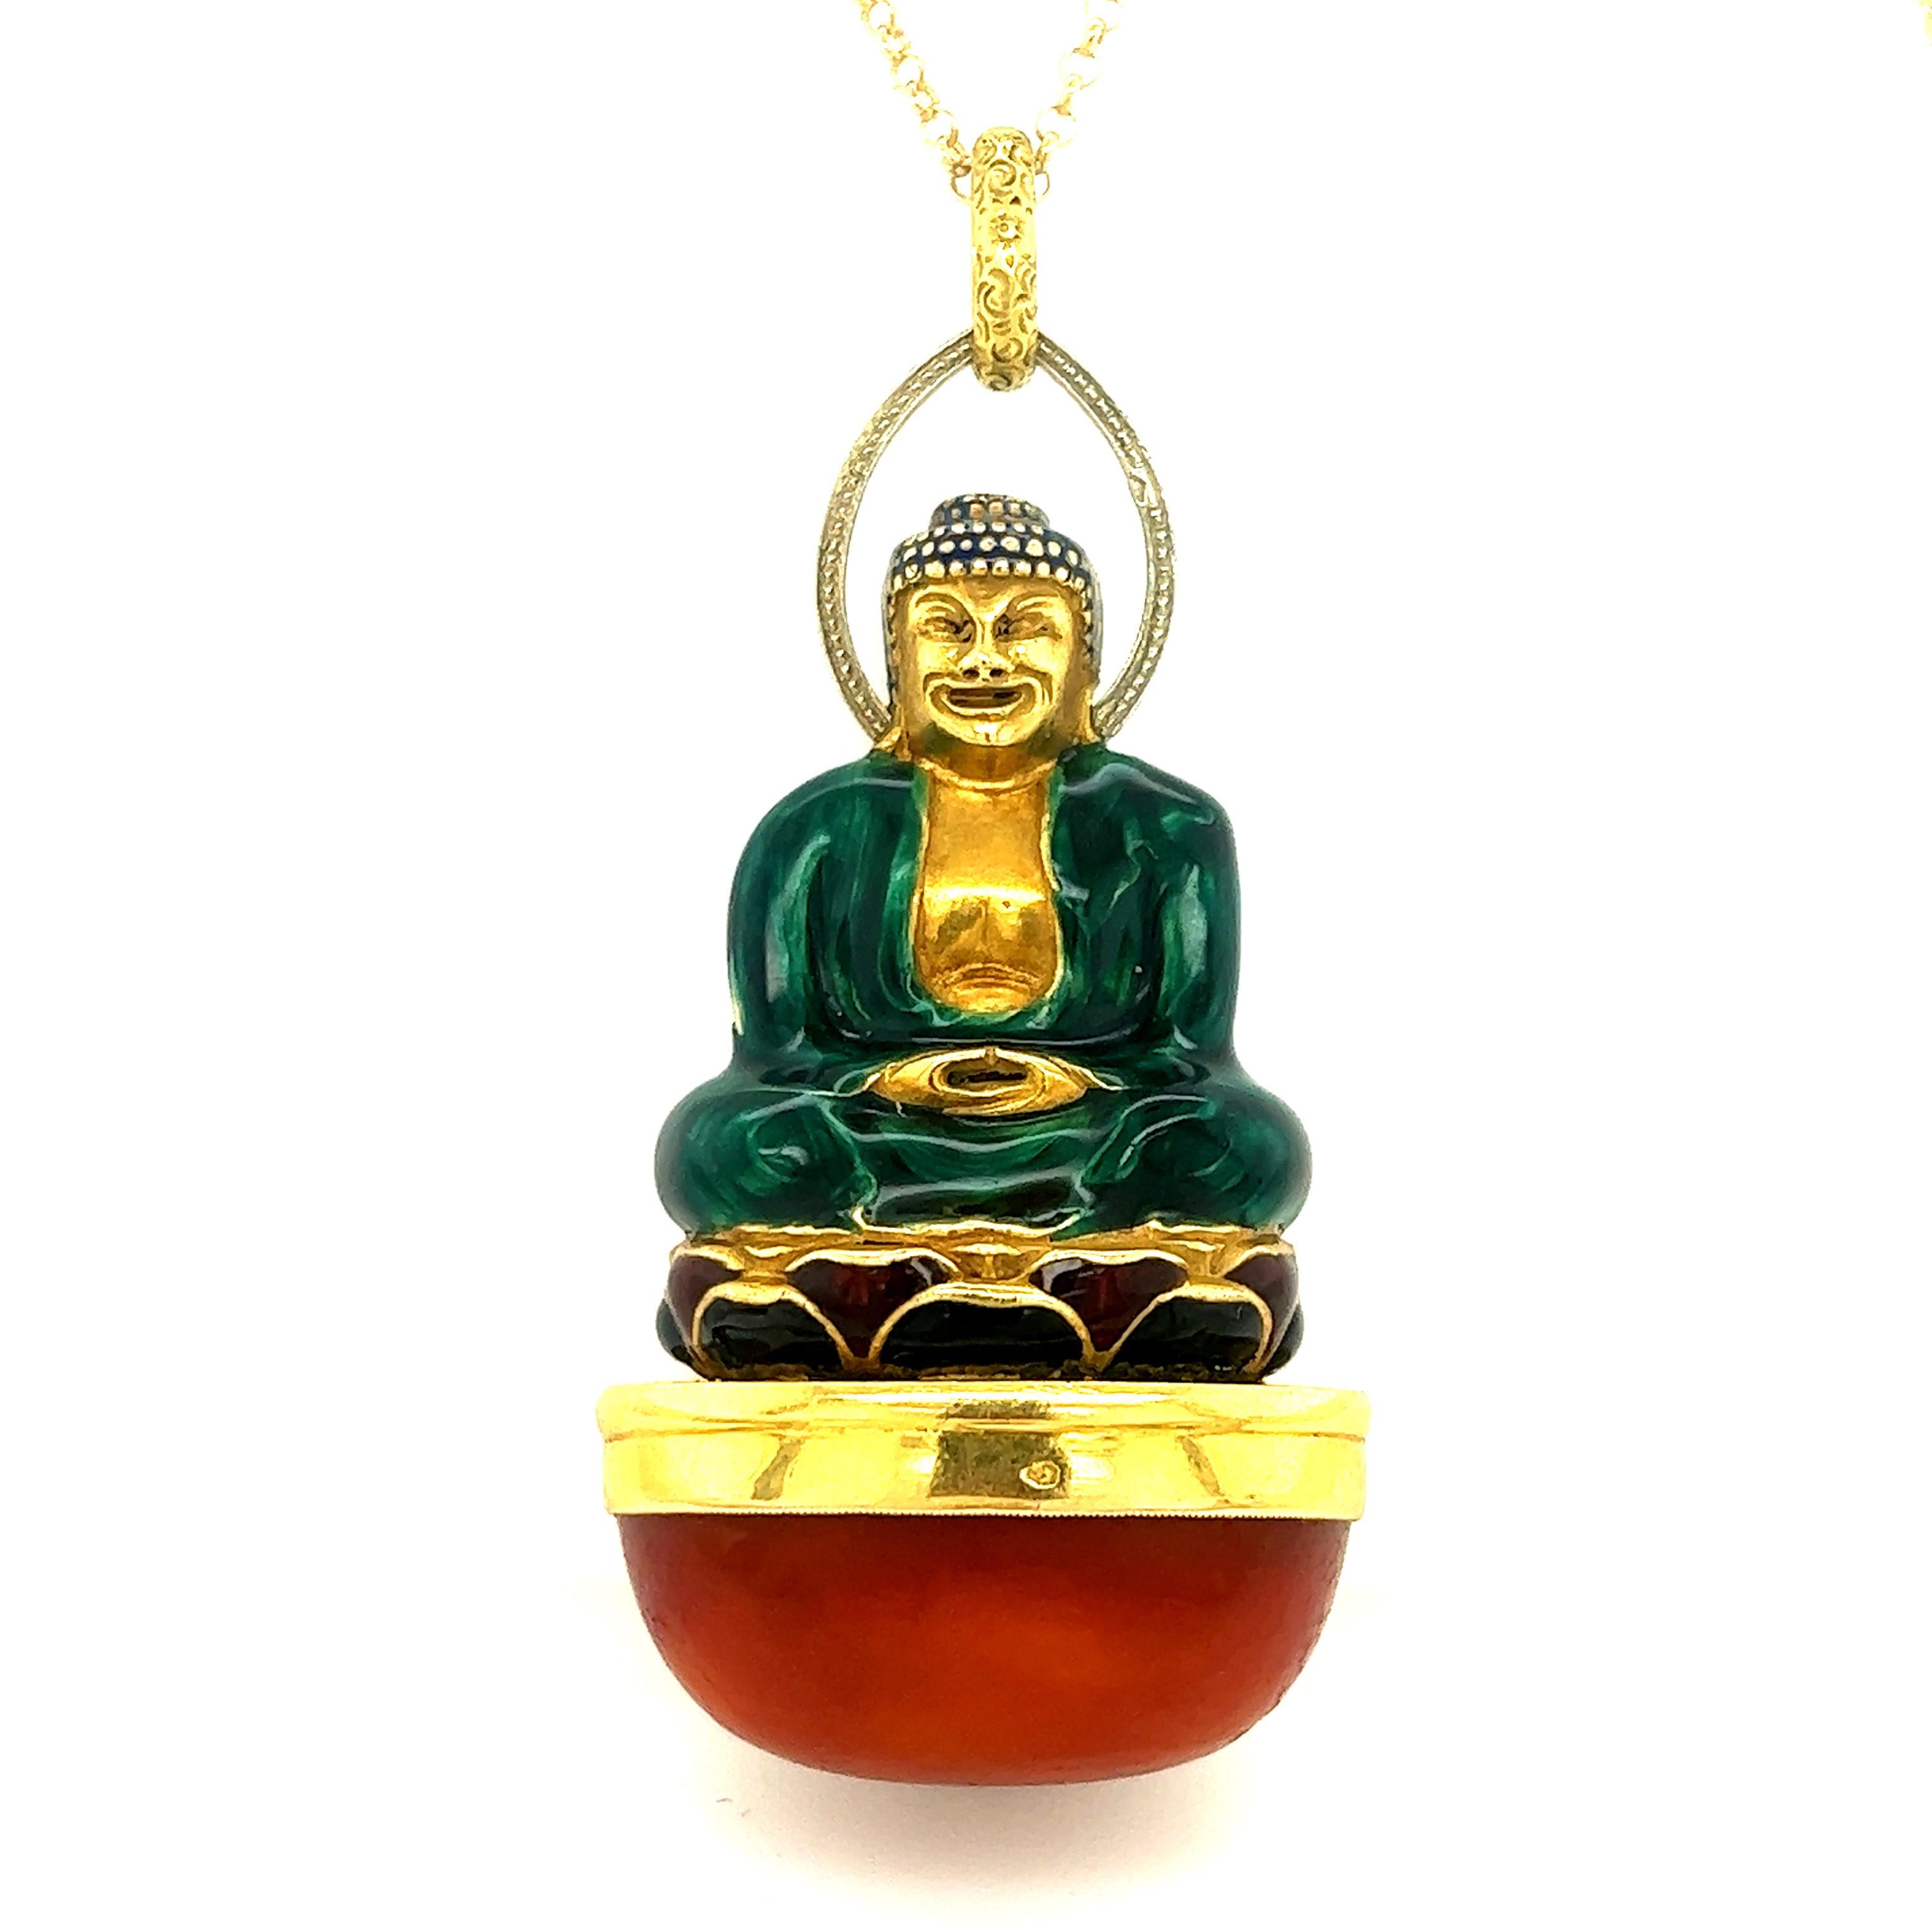 One of a kind art deco pendant crafted in 18k yellow gold. This rare piece of jewelry was master crafted by the famous Parisian atelier Sasportas.  The pendant is crafted in the form of a buddha resting peacefully atop a large cabochon cut amber